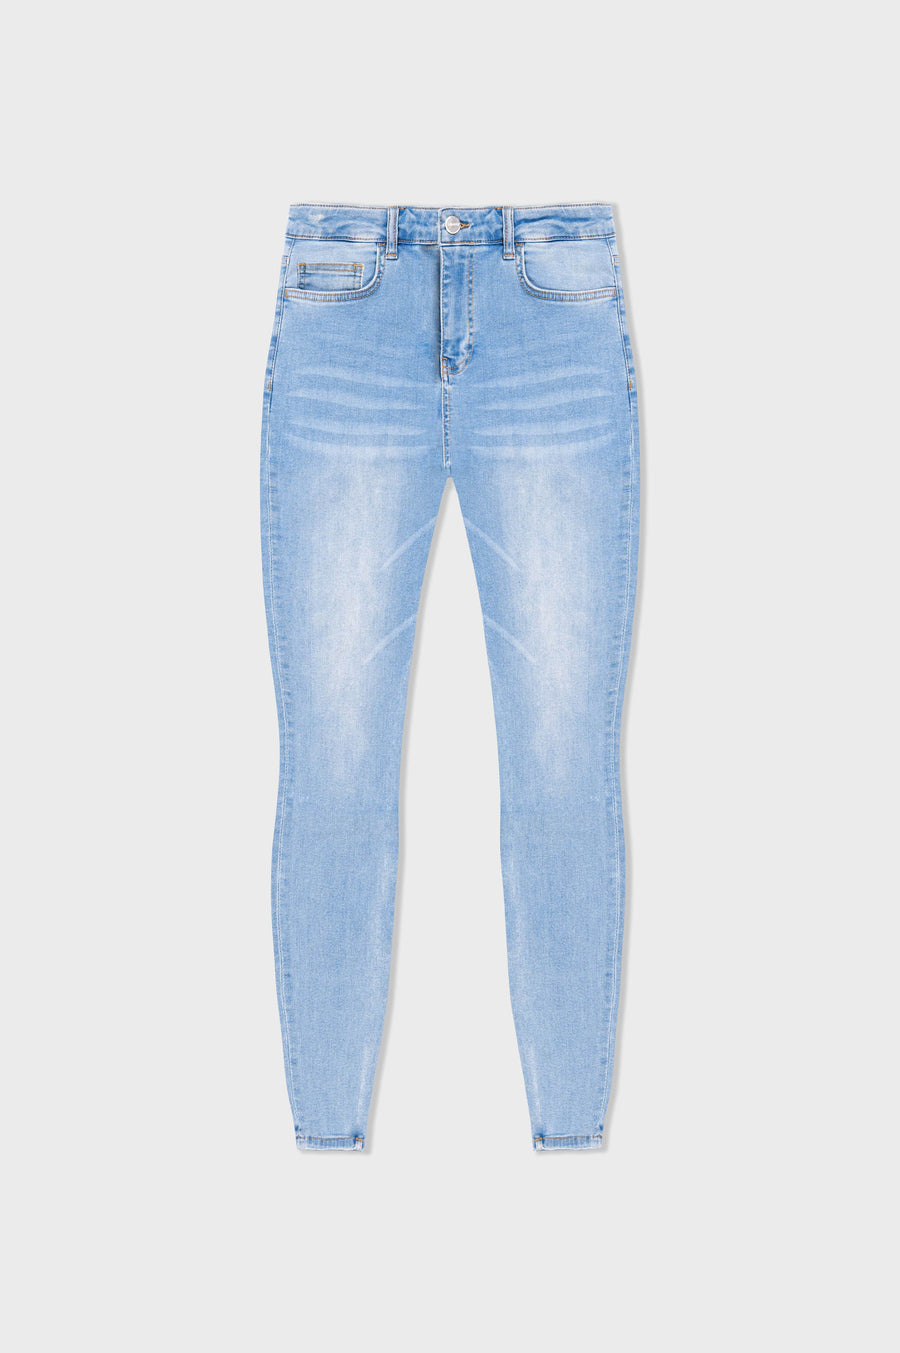 Legend London Jeans - spray on LIGHT BLUE JEANS - NON RIPPED